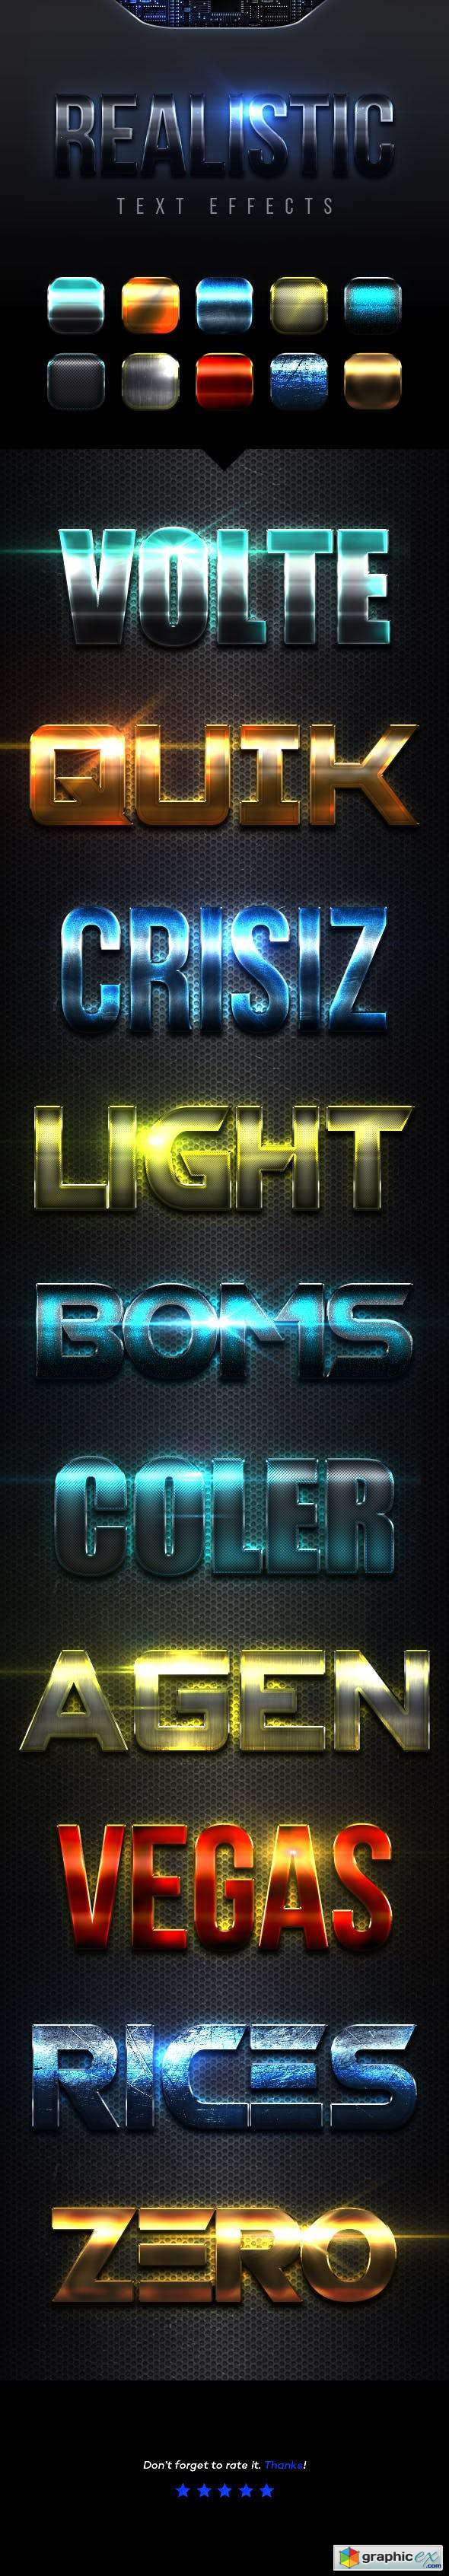 Realistic Text Effects Vol.4